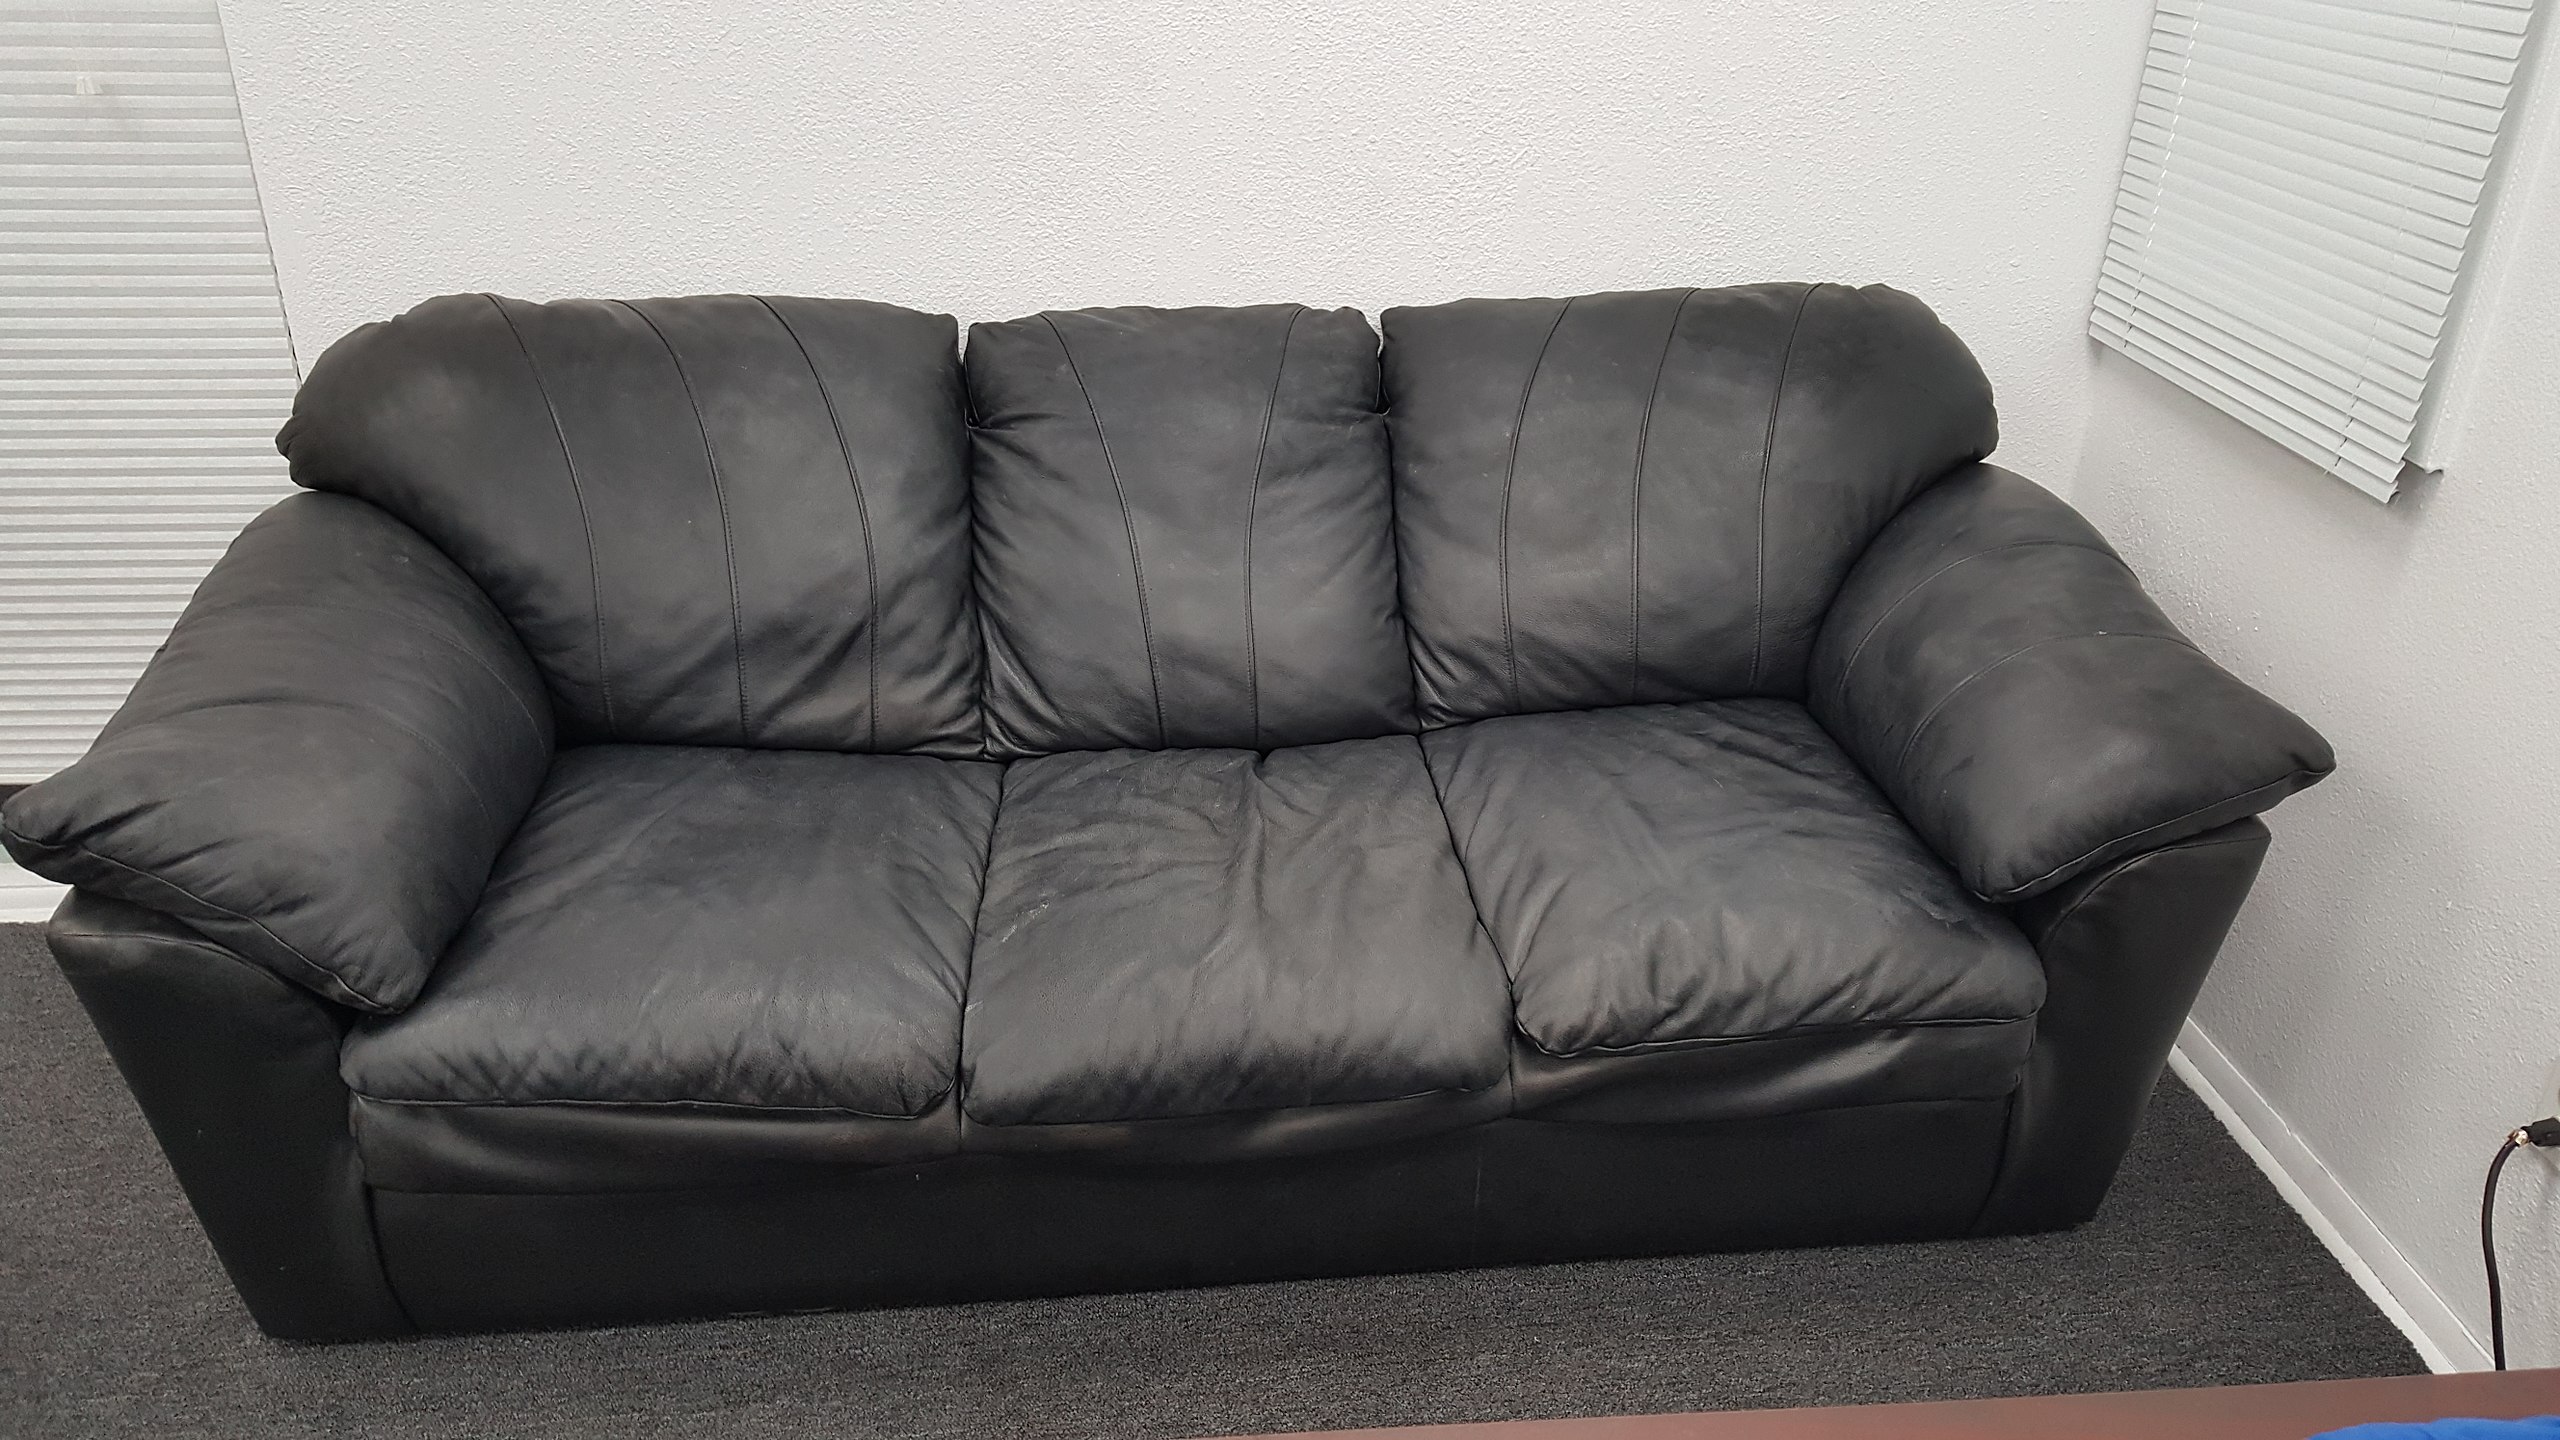 Best Backroom Casting Couch abused ad